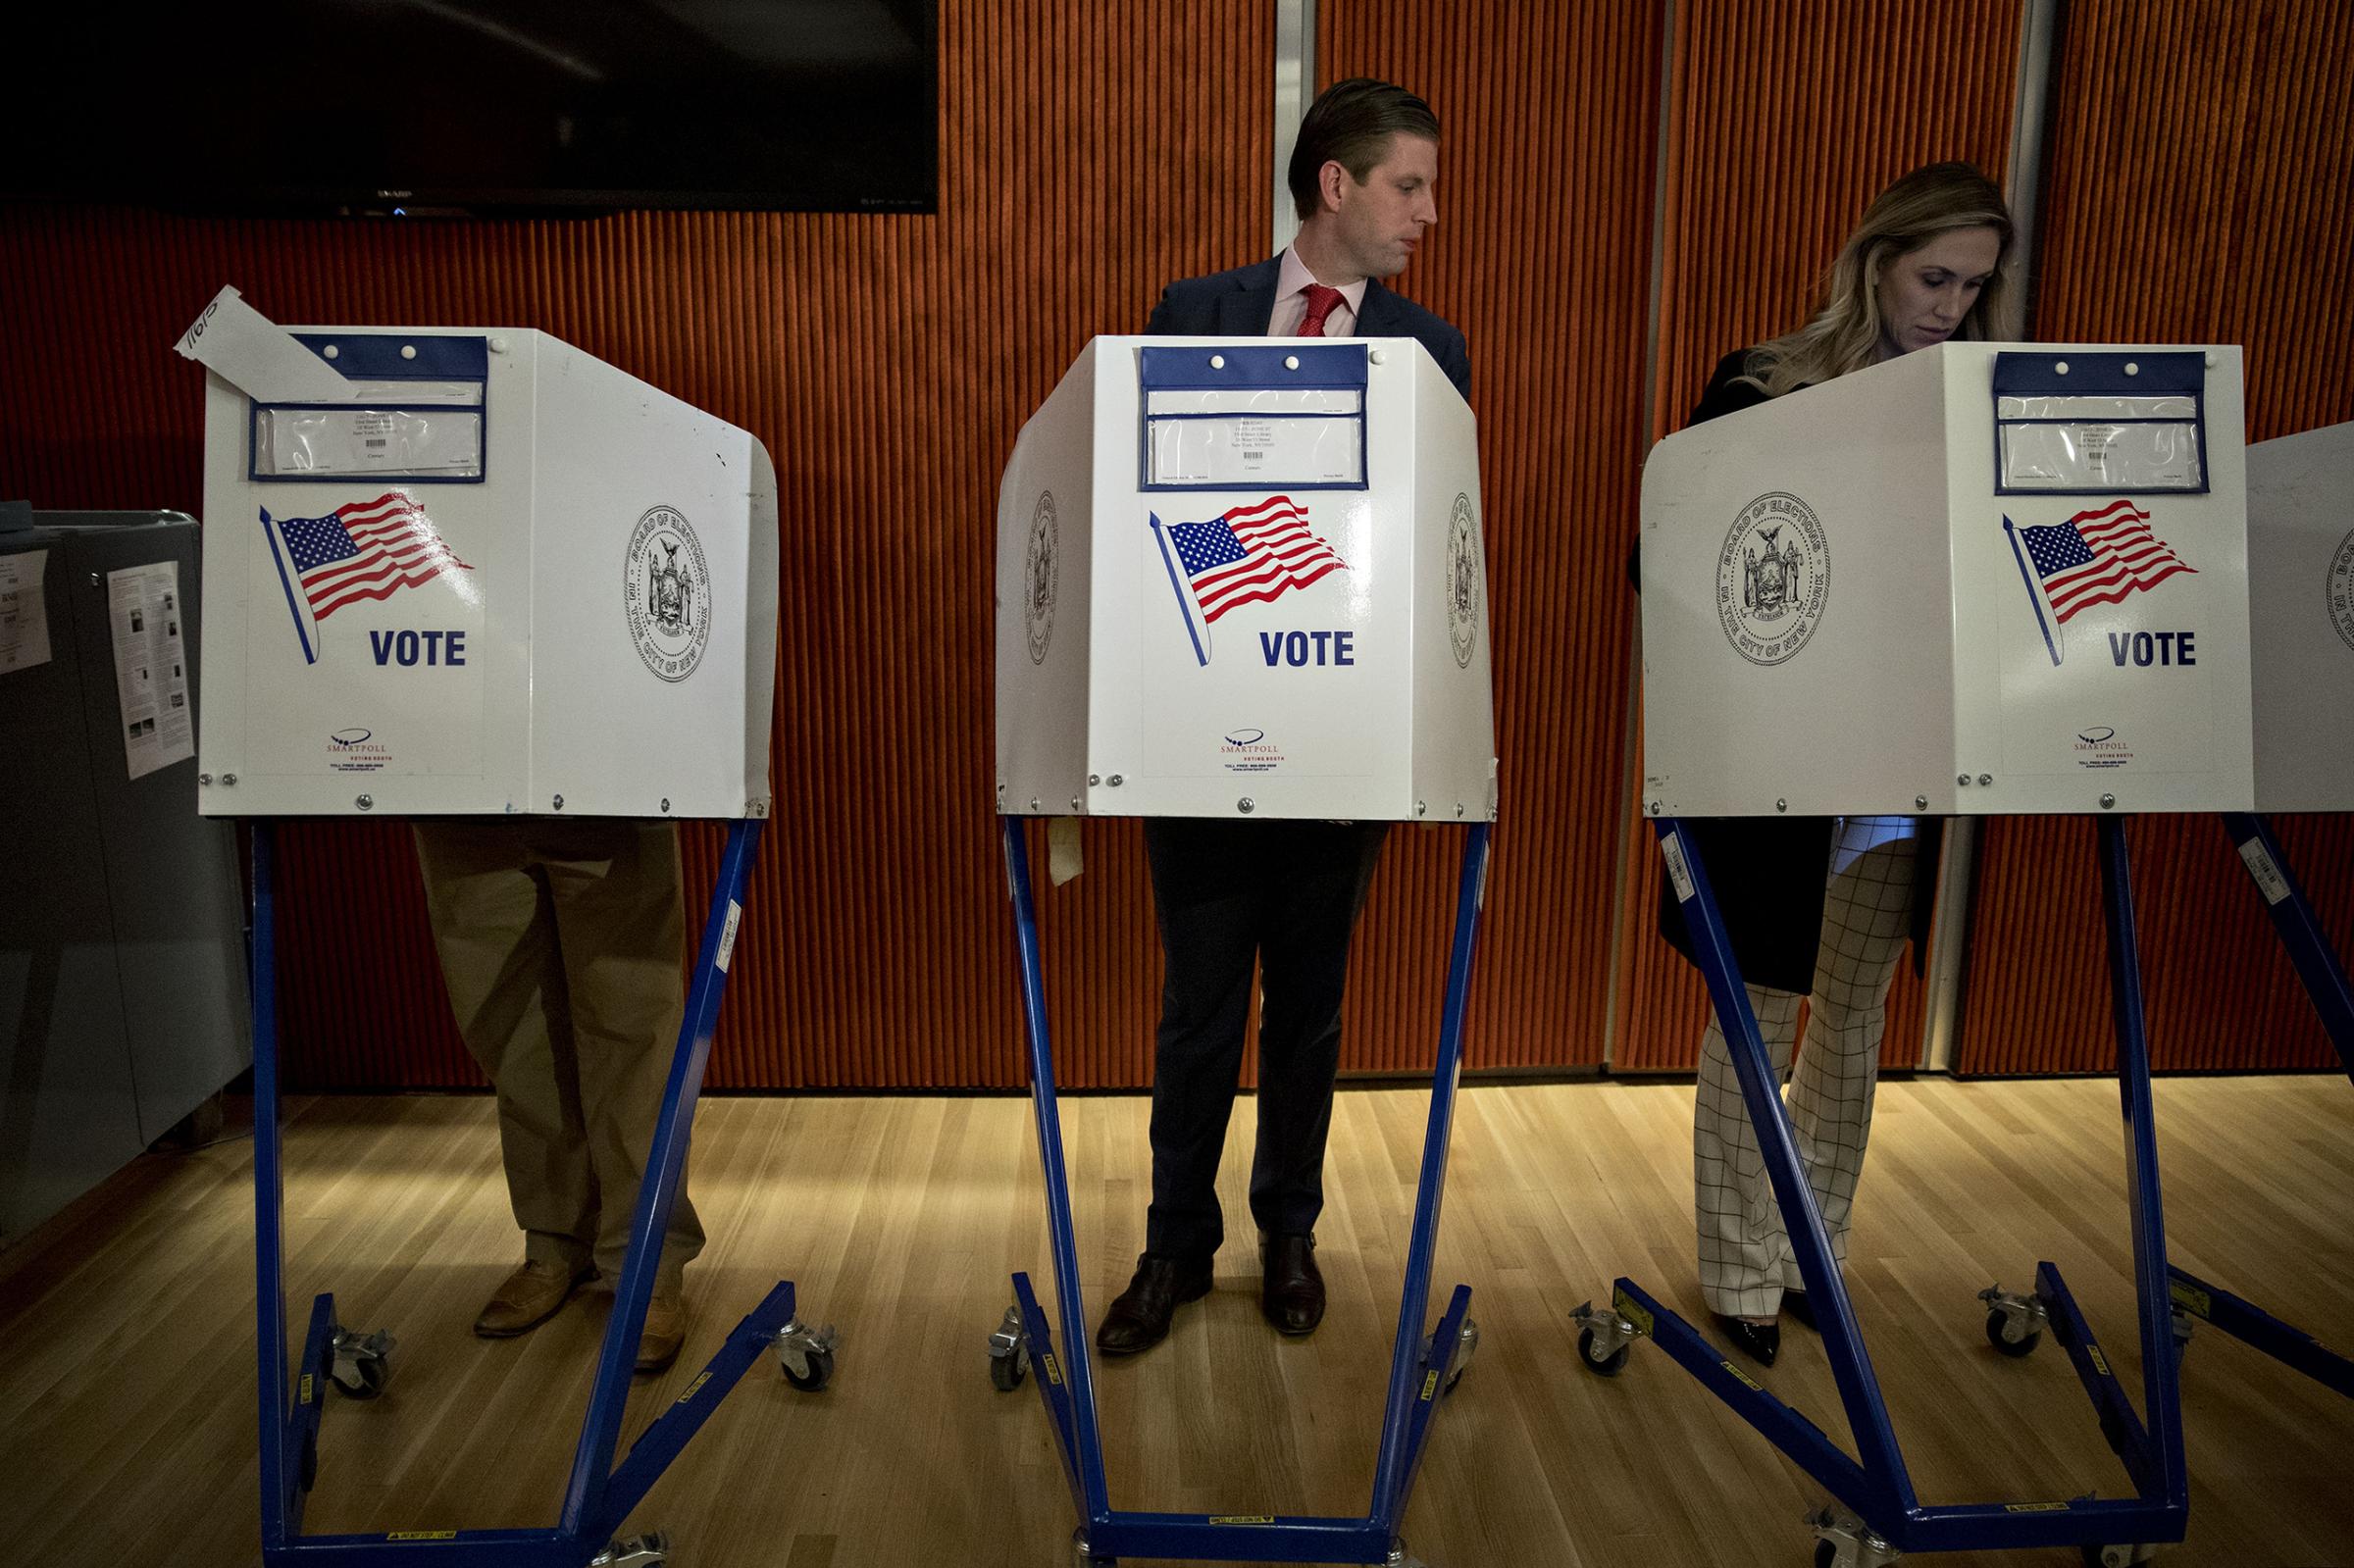 Eric Trump, son of of Republican presidential nominee Donald Trump, looks at his wife Lara's voting booth at the 53rd Street Library in New York, on Nov. 8, 2016.